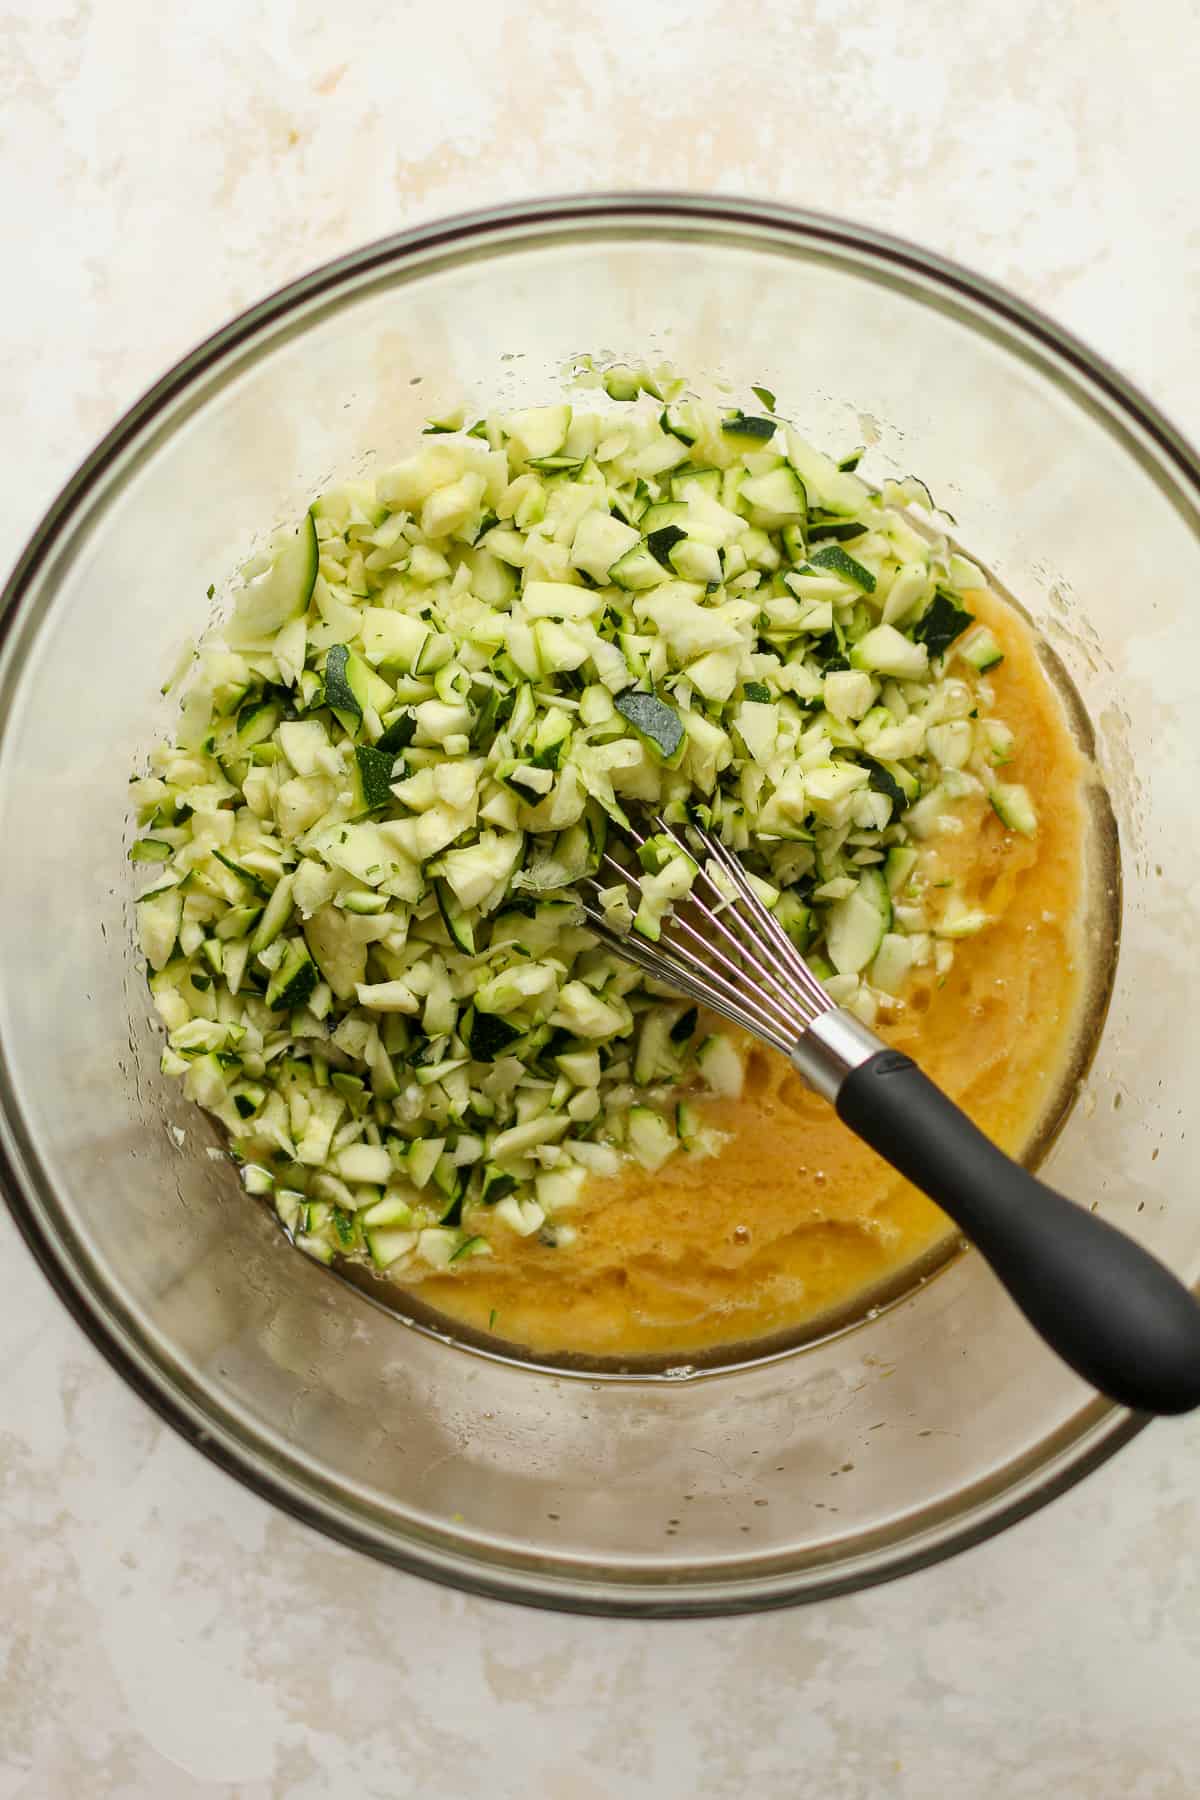 A bowl of the wet ingredients with the shredded zucchini on top.